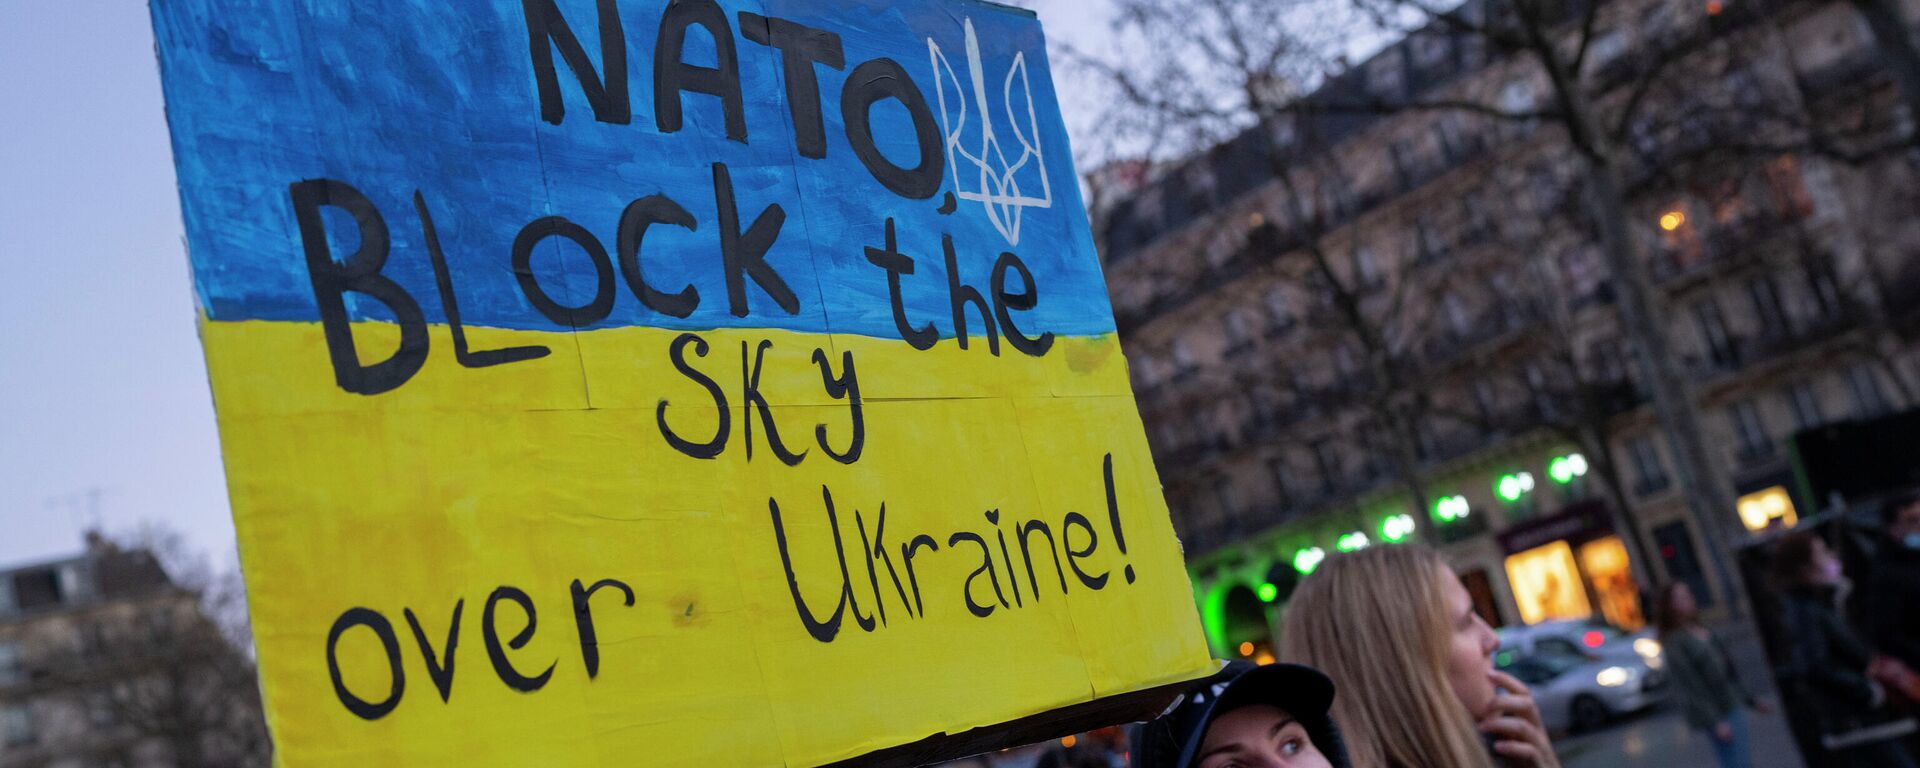 A protestor calls for on NATO to enforce a no-fly zone over the Ukraine during a demonstration in Paris, France, Saturday, Feb. 26, 2022 - Sputnik International, 1920, 14.03.2022